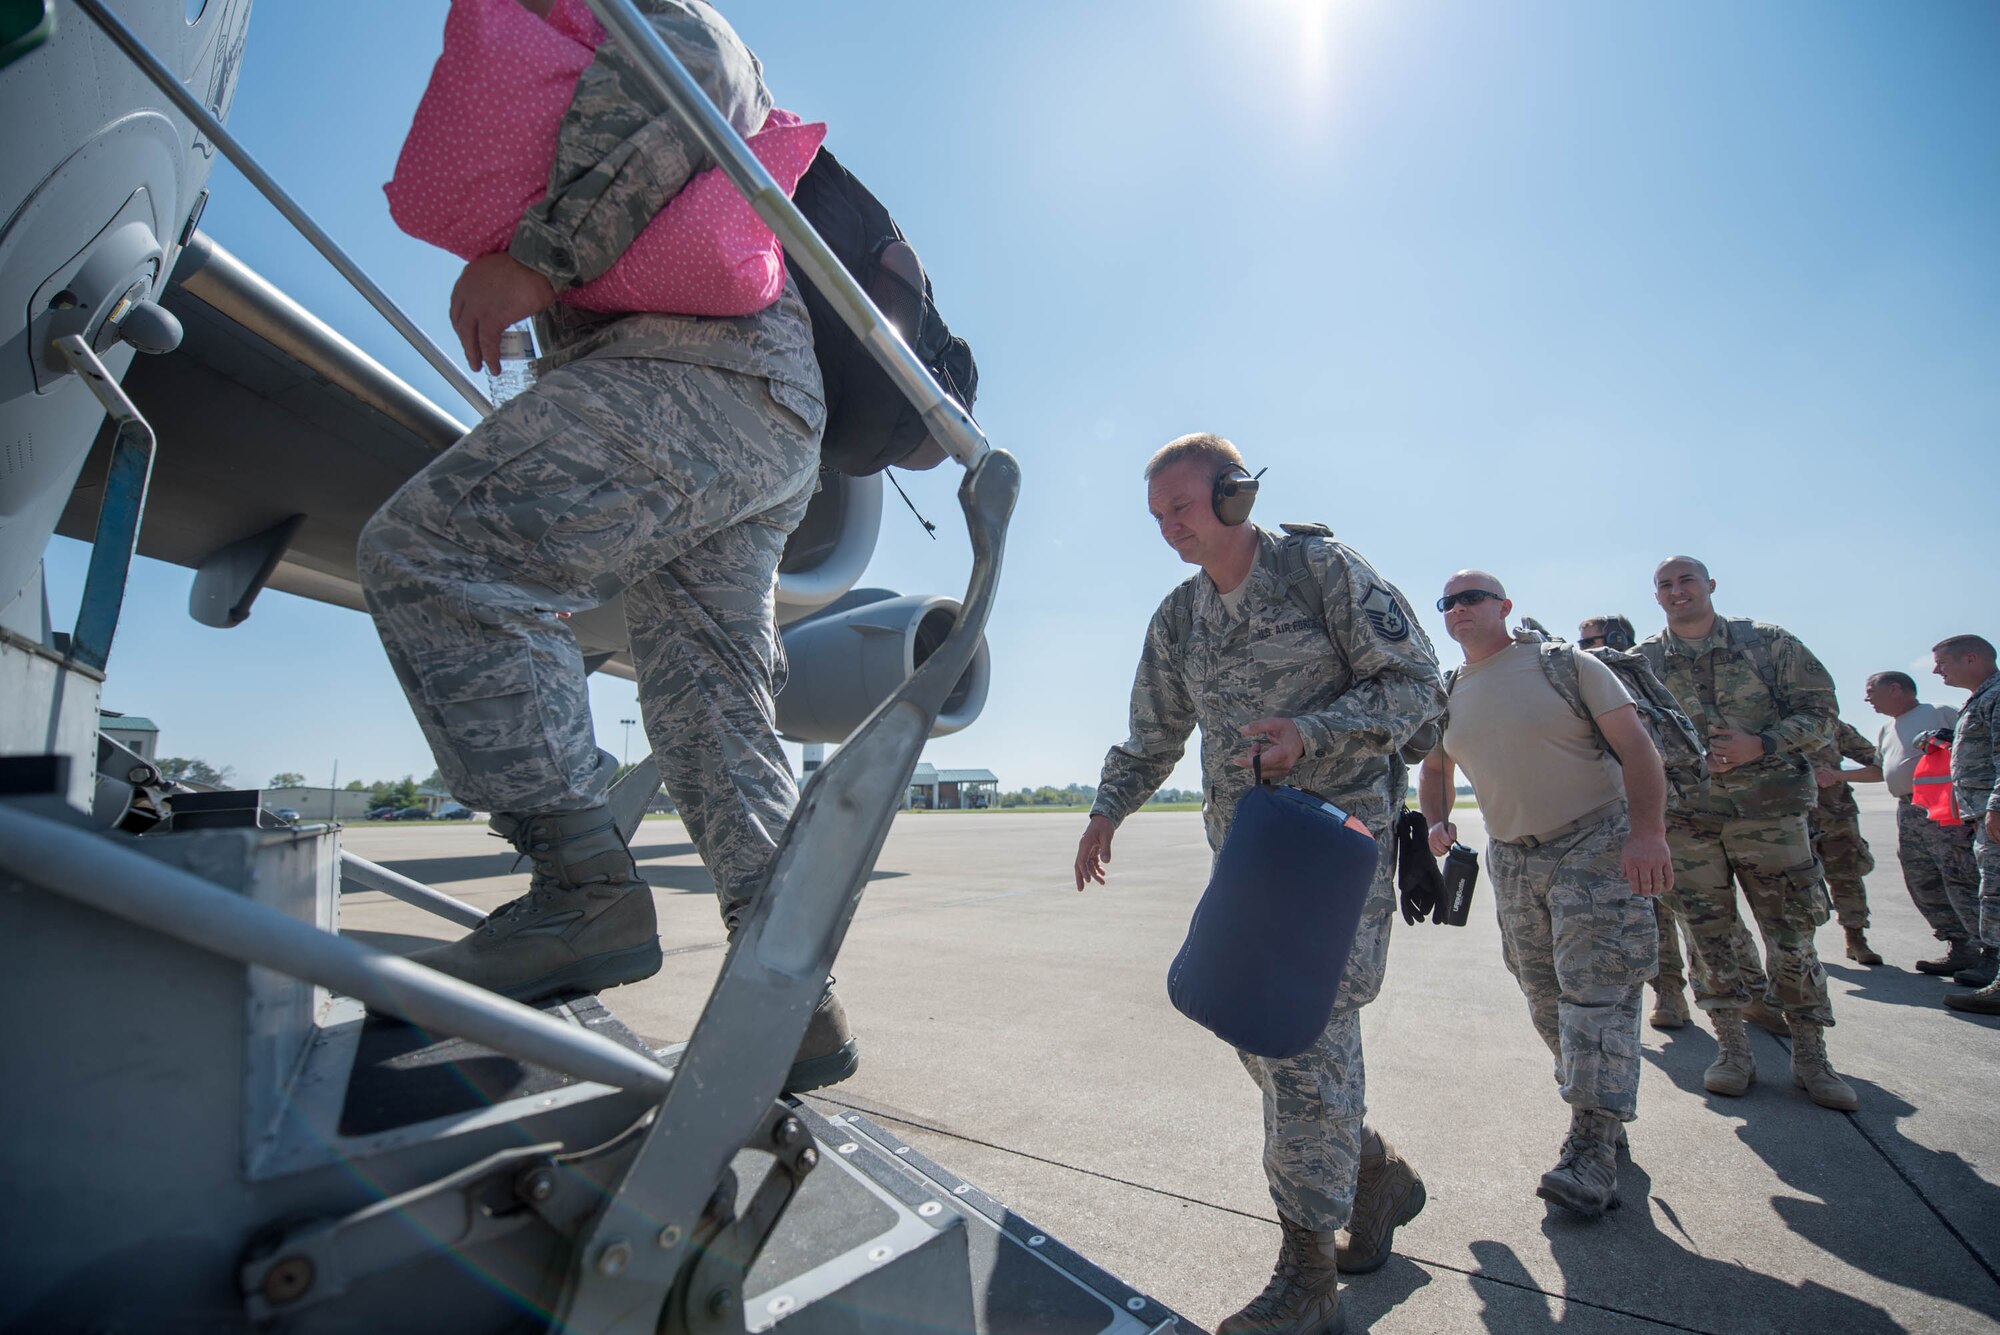 Airmen from the Kentucky Air National Guard’s 123rd Contingency Response Group board a West Virginia Air National Guard C-17 at the Kentucky Air National Guard Base in Louisville, Ky., Sept 23, 2017, in support of Hurricane Maria recovery operations. Thirty-two members of the unit are deploying to San Juan, Puerto Rico to establish an air cargo hub to process relief supplies.